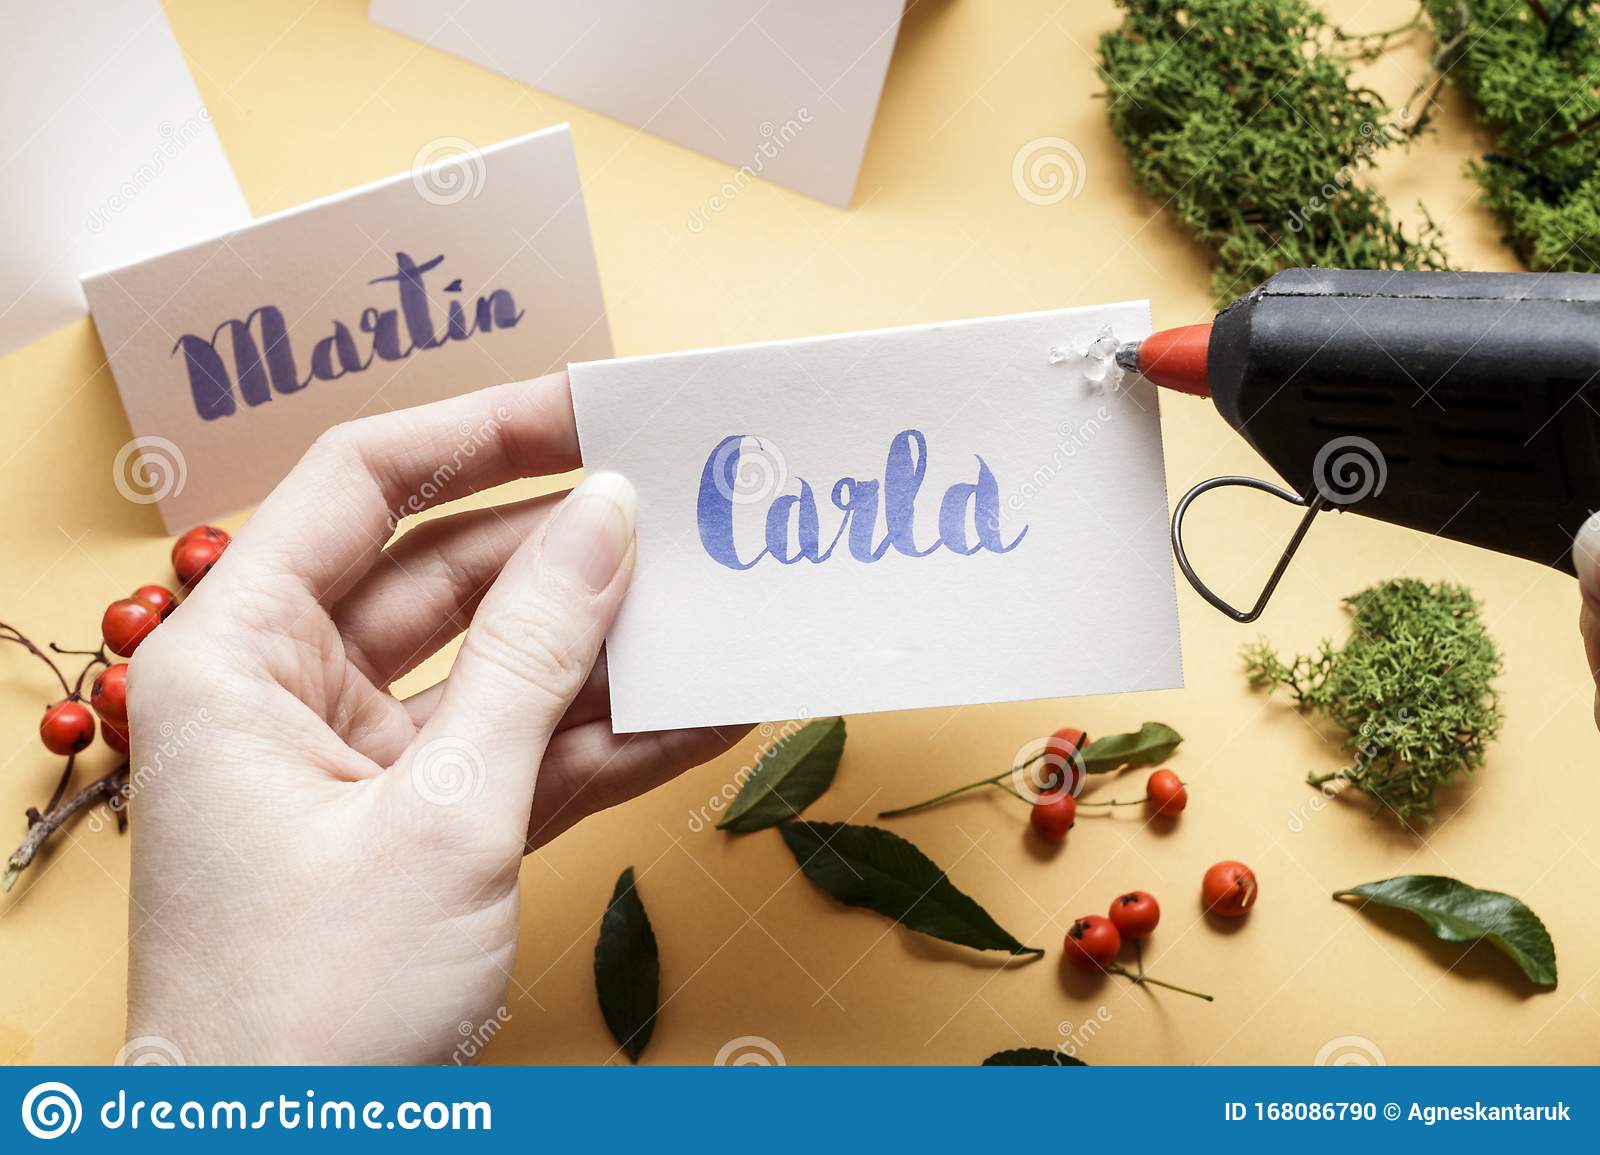 How To Make Wedding Place Name Cards With Handwritten ...